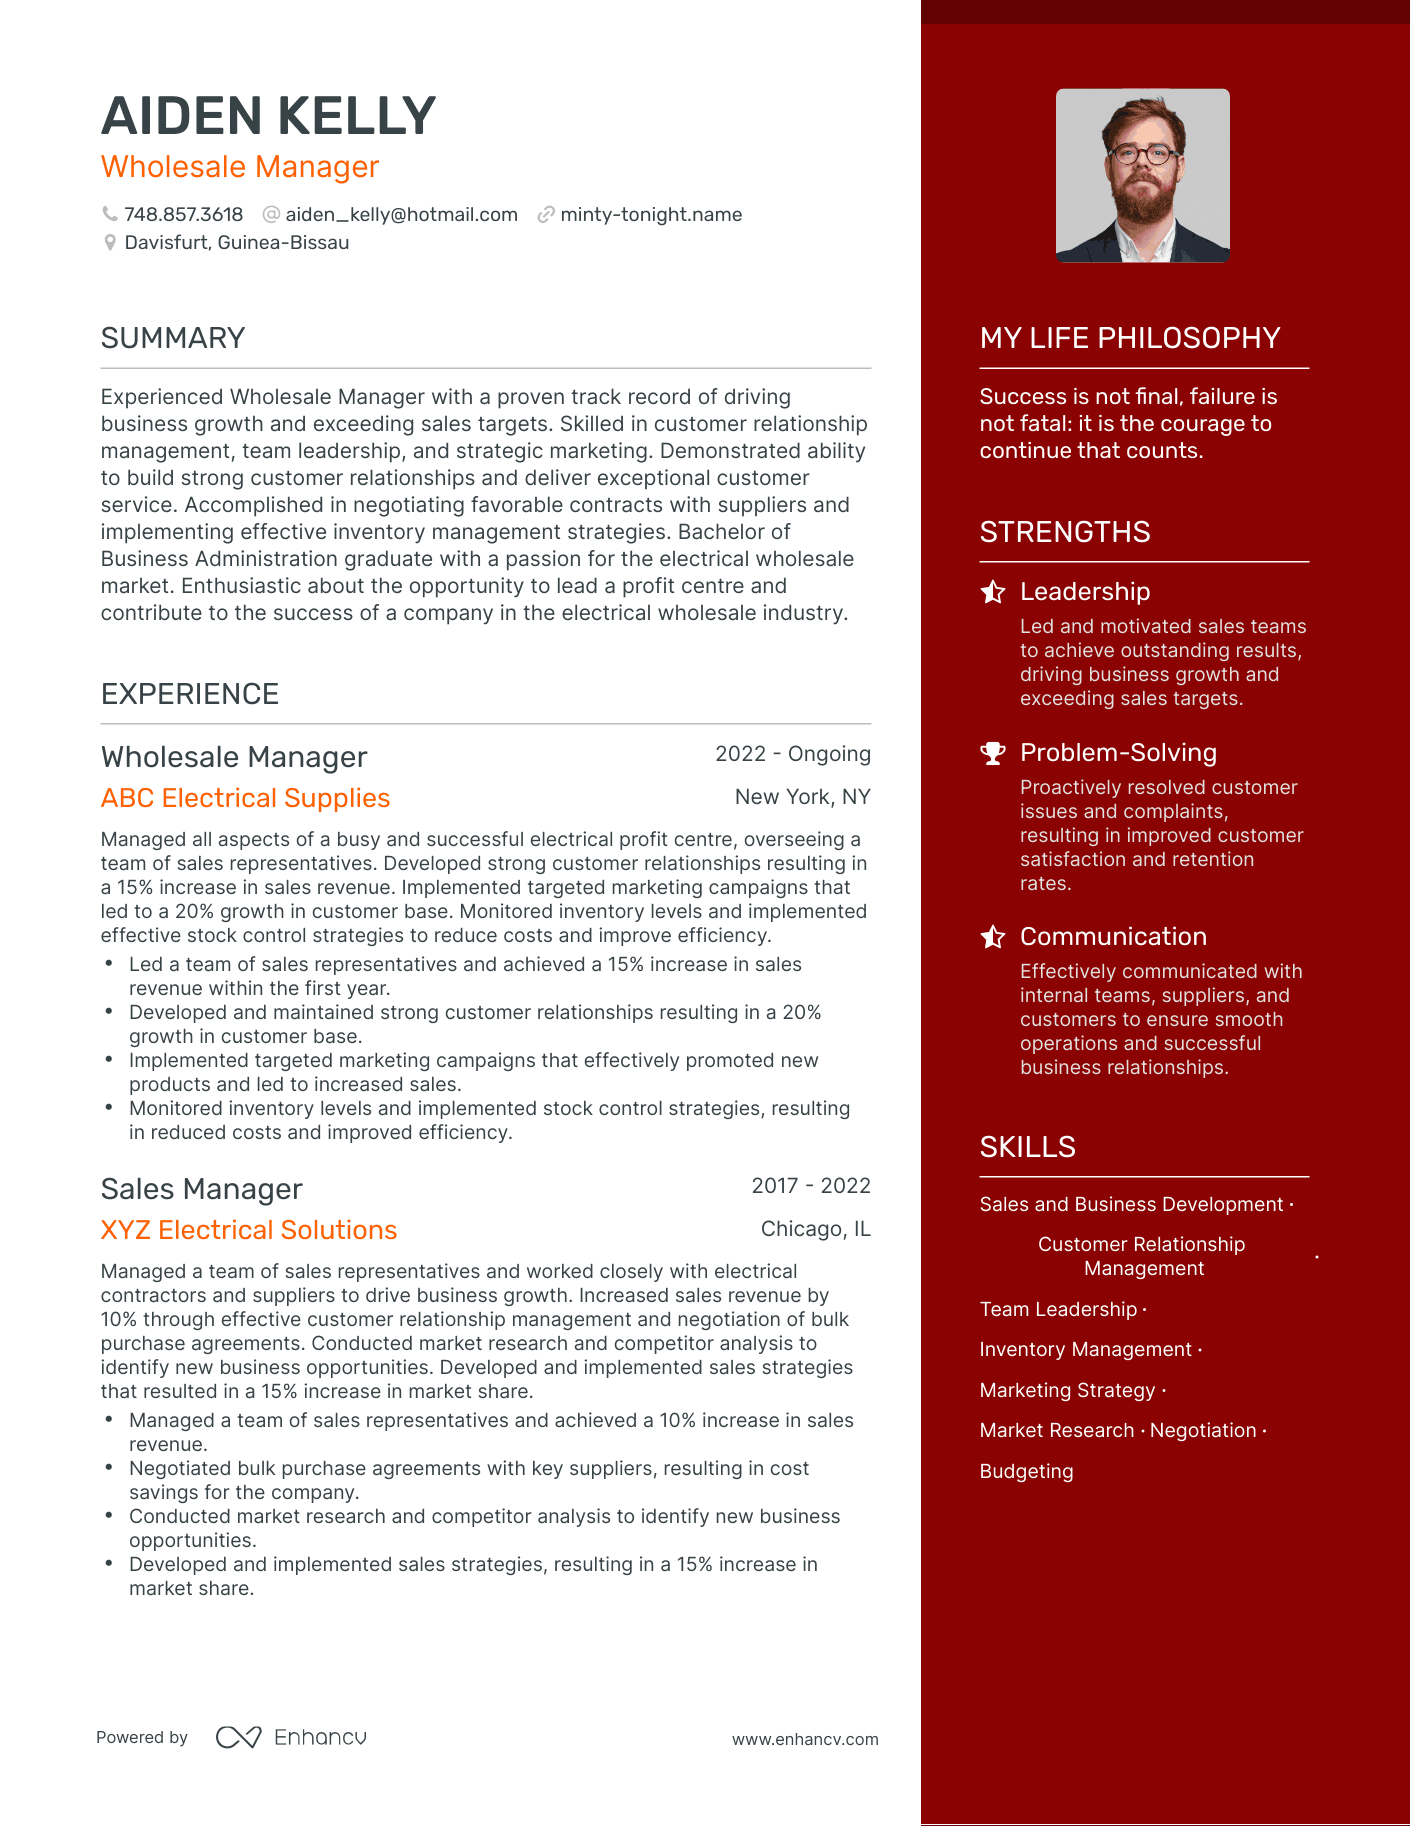 Wholesale Manager resume example